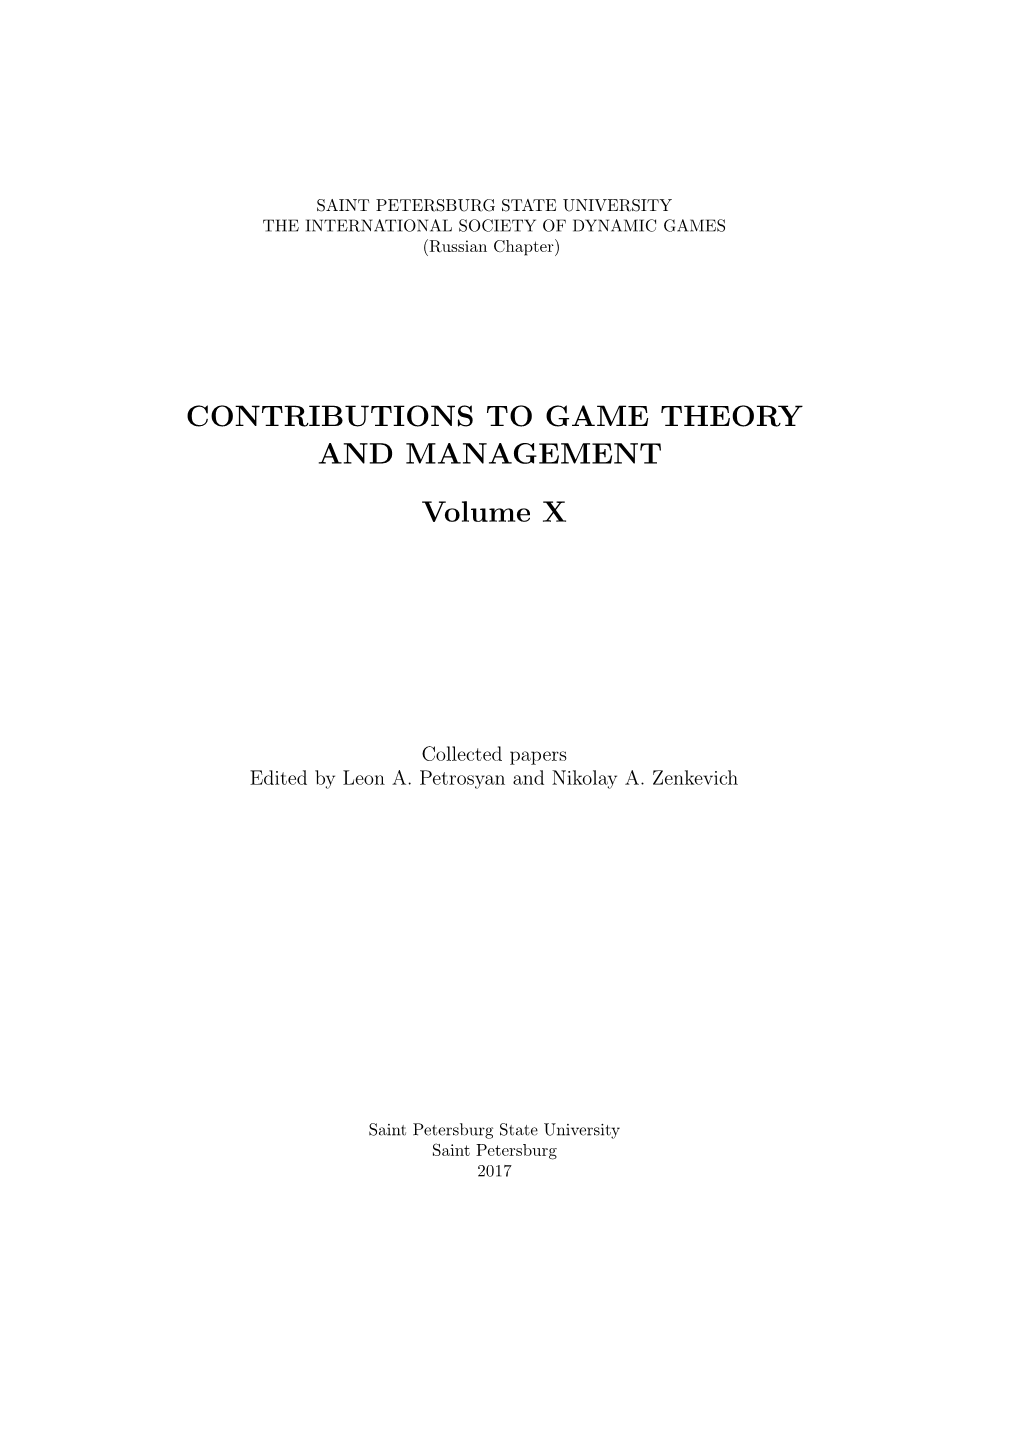 CONTRIBUTIONS to GAME THEORY and MANAGEMENT Volume X